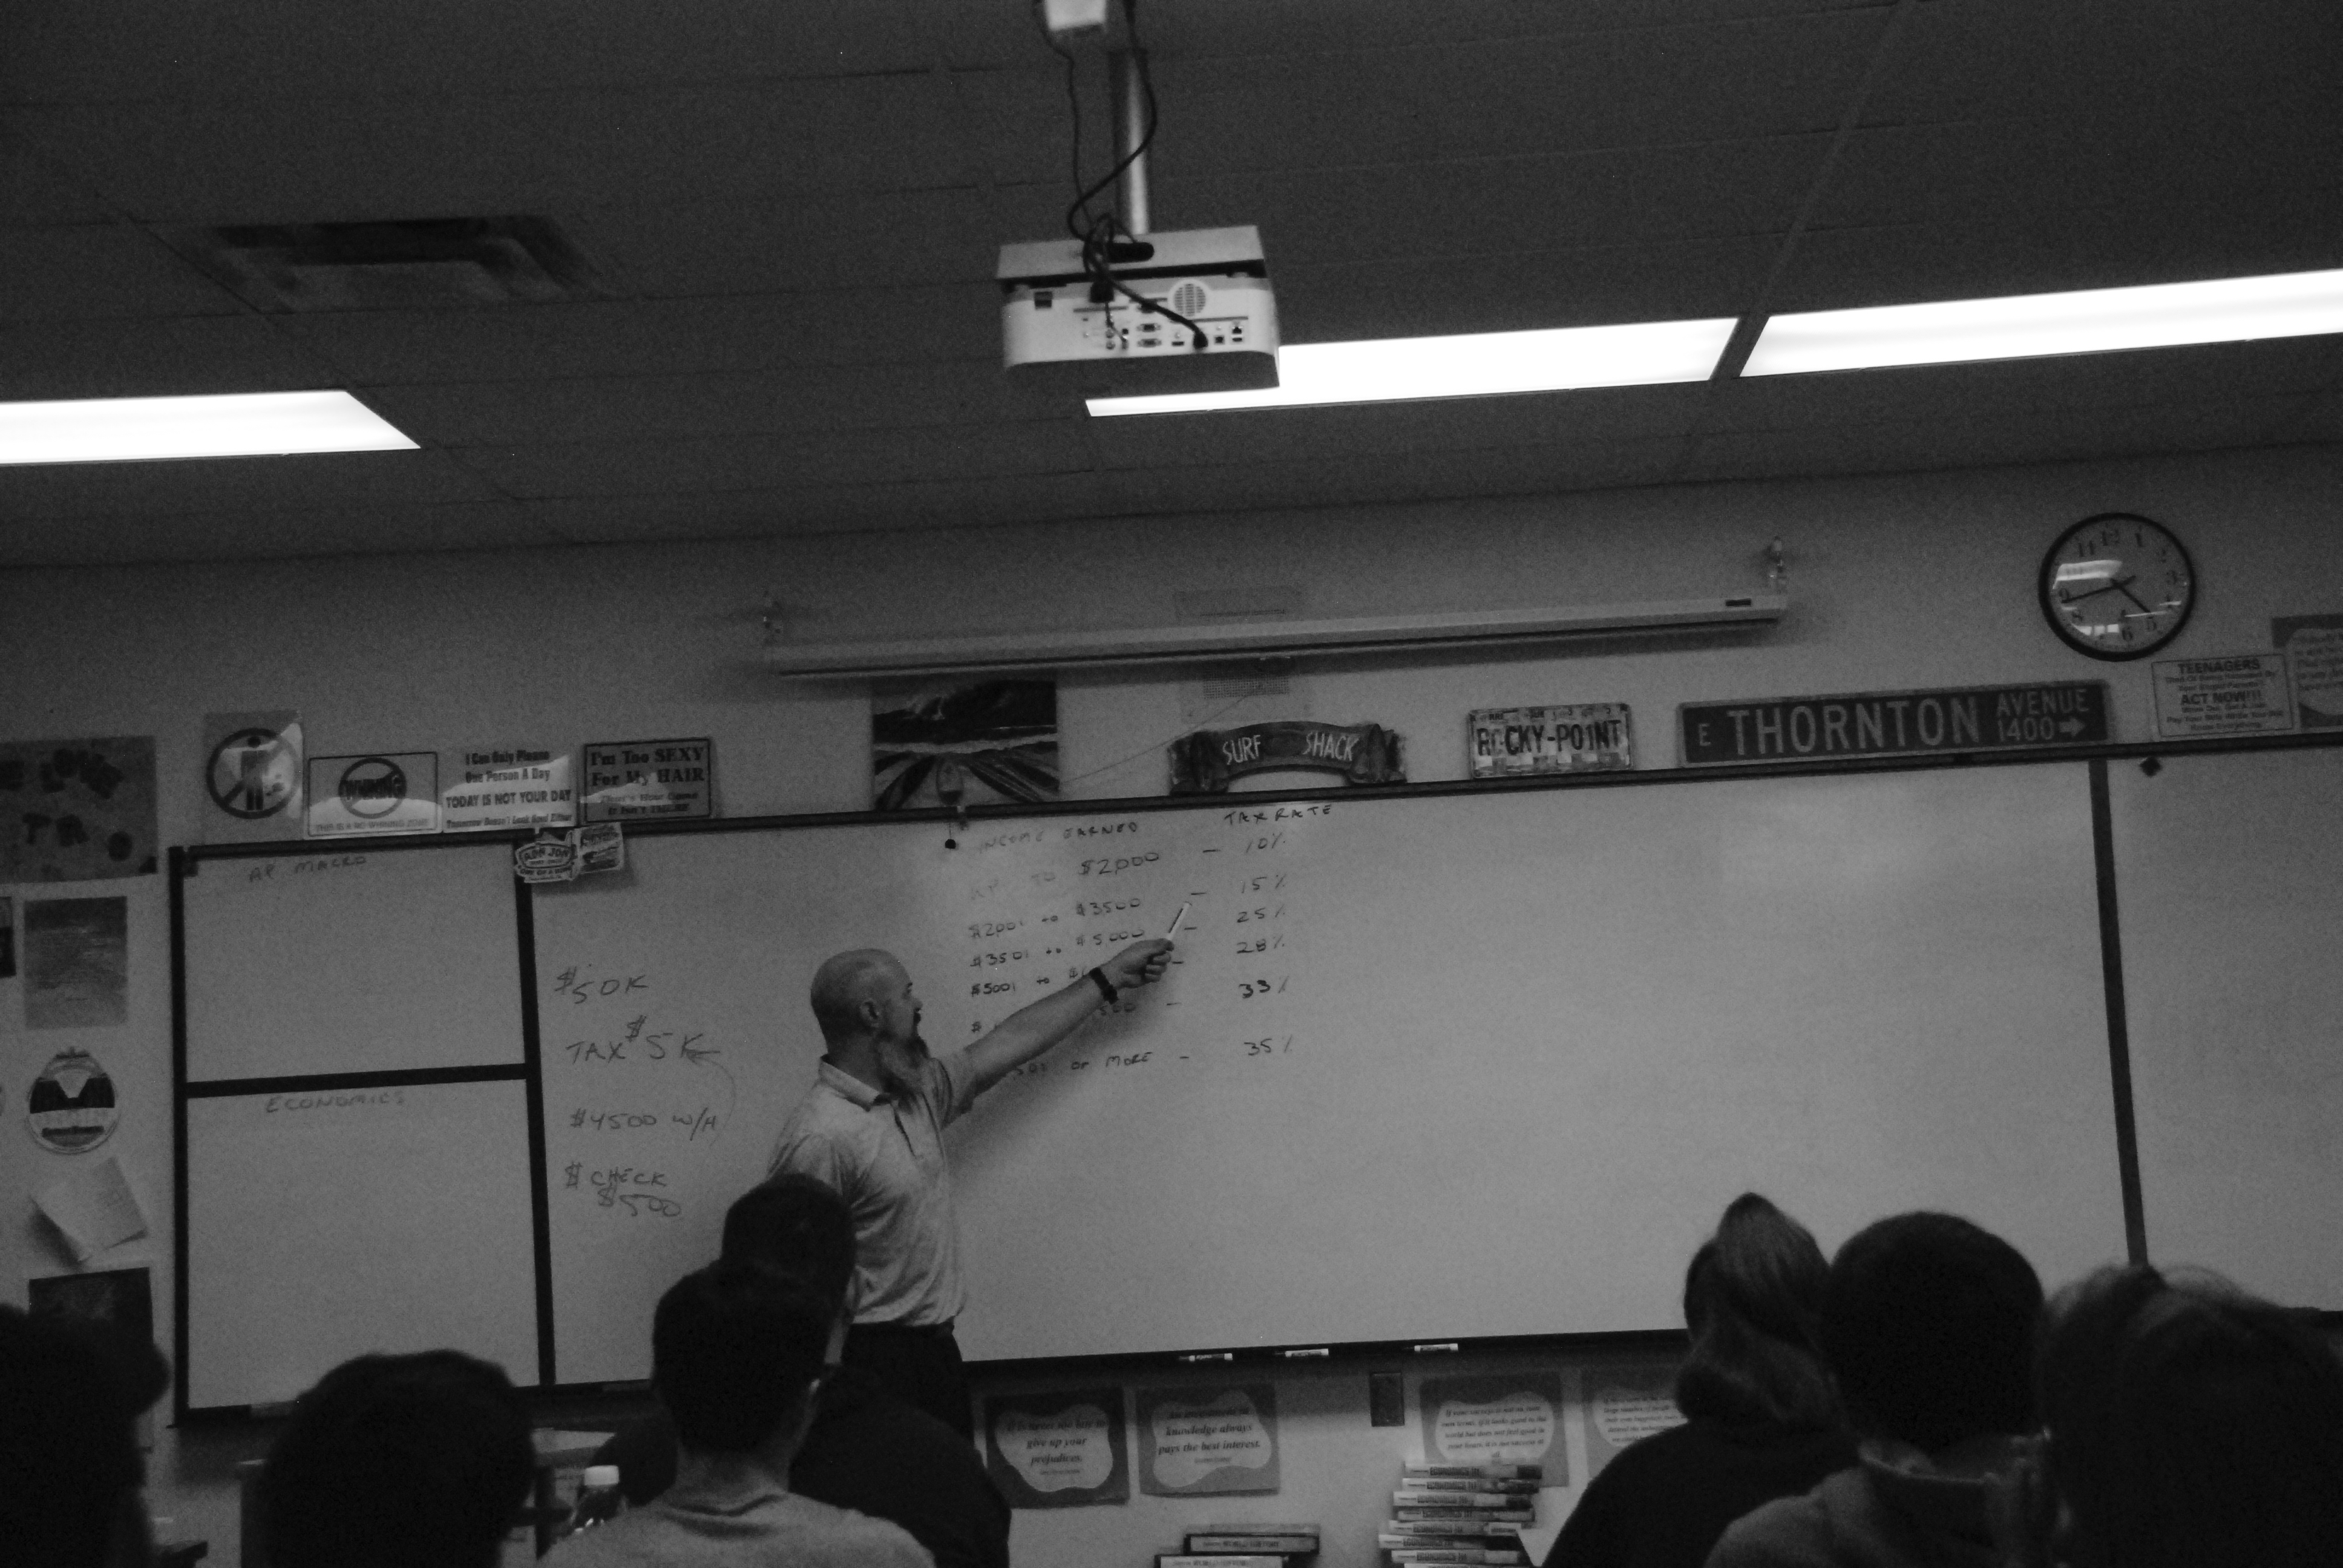 Thornton lectures his students on economics using his own form of currency inside the classroom.